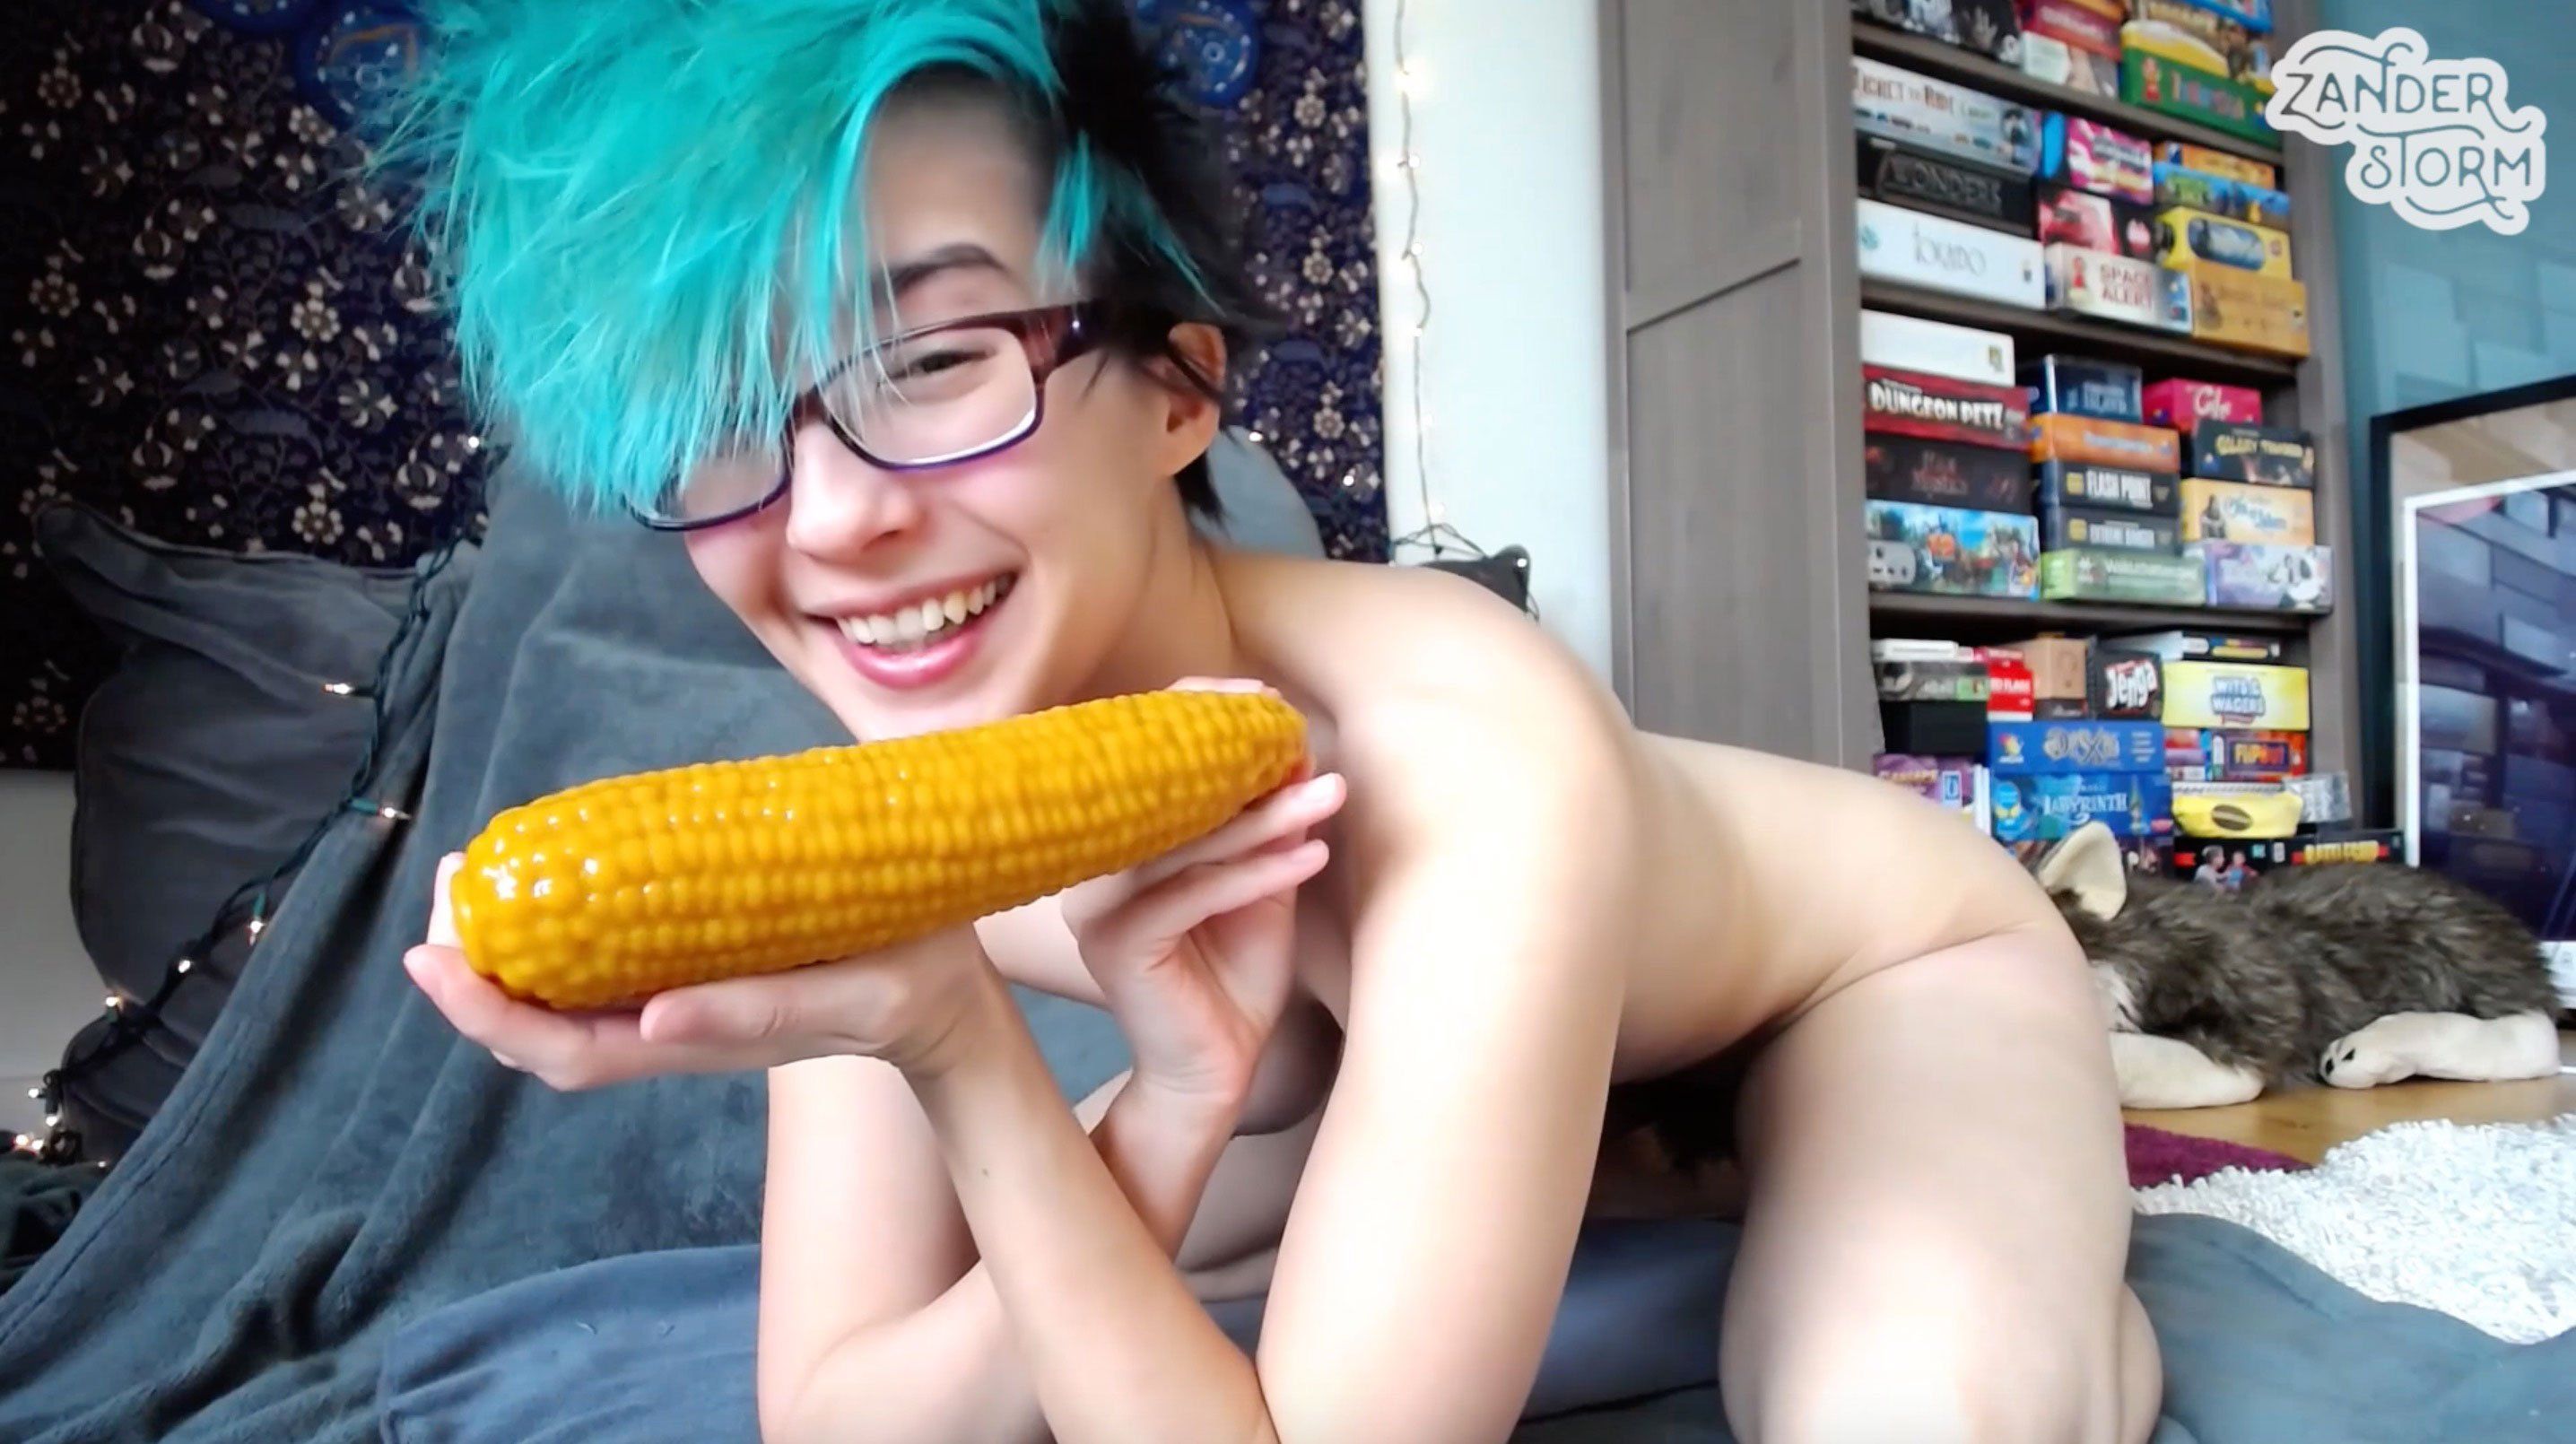 Corn Cob Dildo Or Pussy Very HOT XXX Site Pics Comments 3